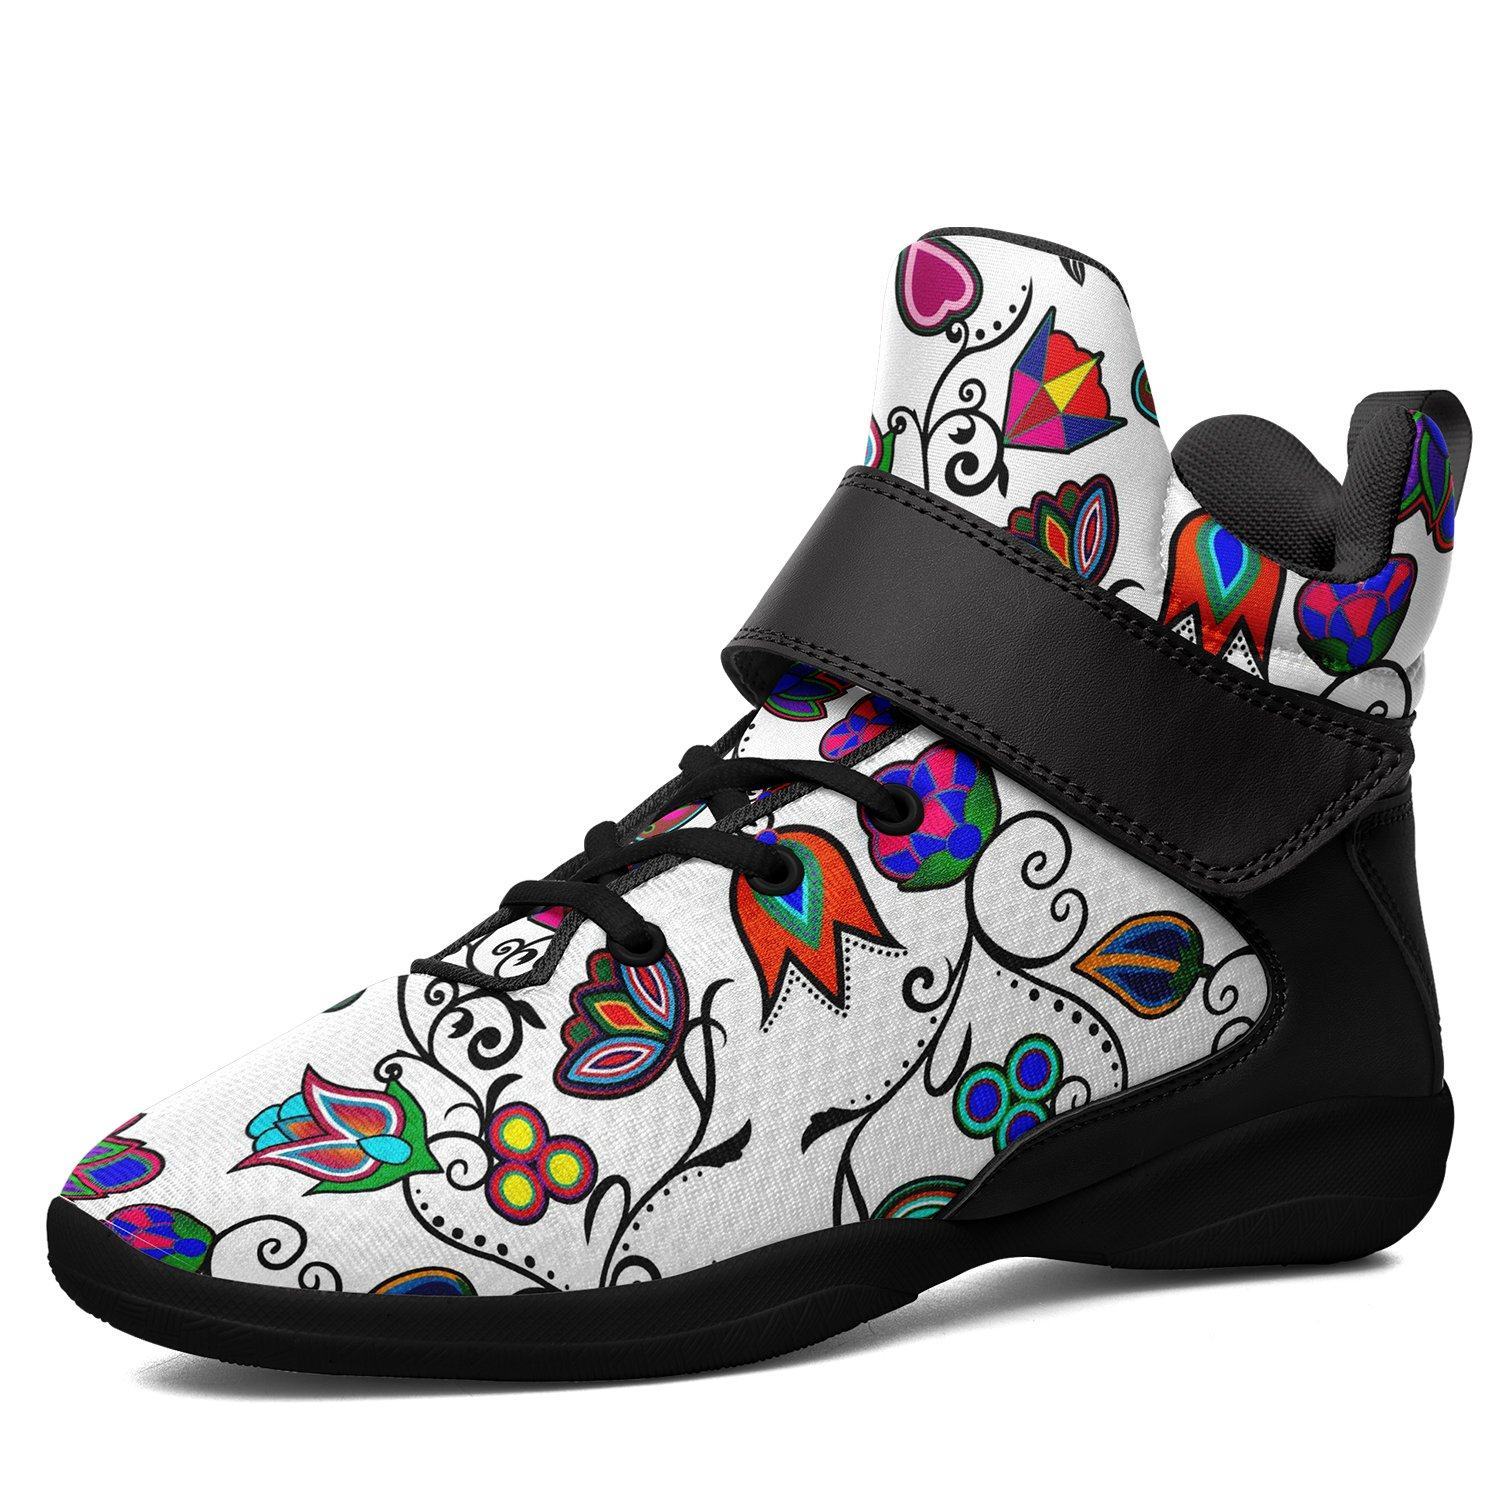 Indigenous Paisley White Kid's Ipottaa Basketball / Sport High Top Shoes 49 Dzine US Child 12.5 / EUR 30 Black Sole with Black Strap 